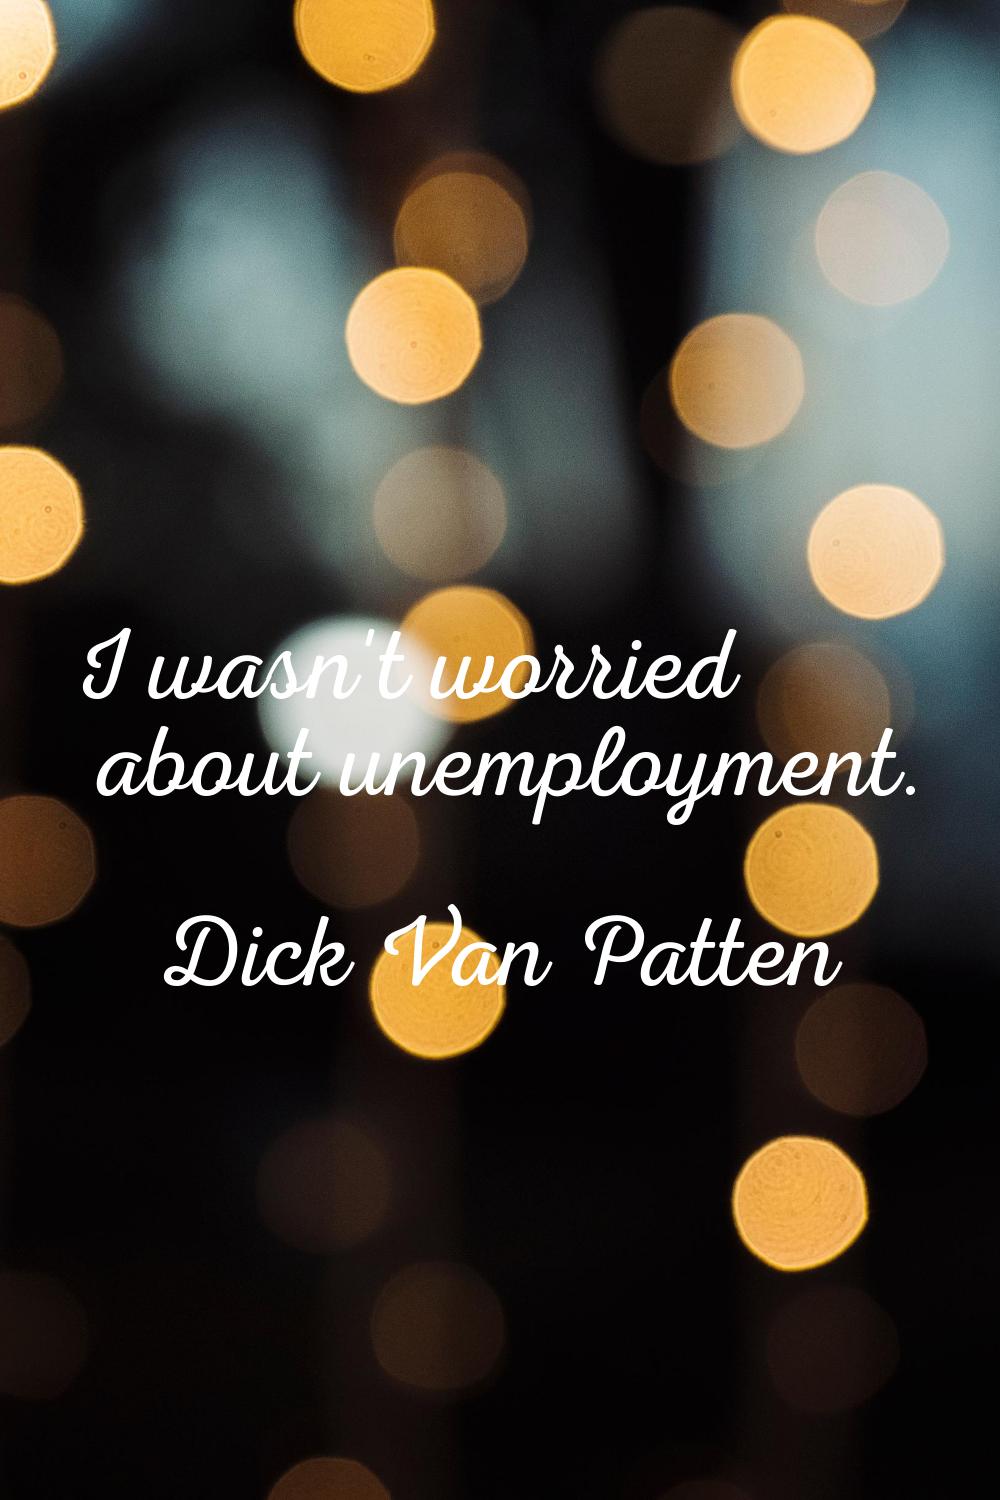 I wasn't worried about unemployment.